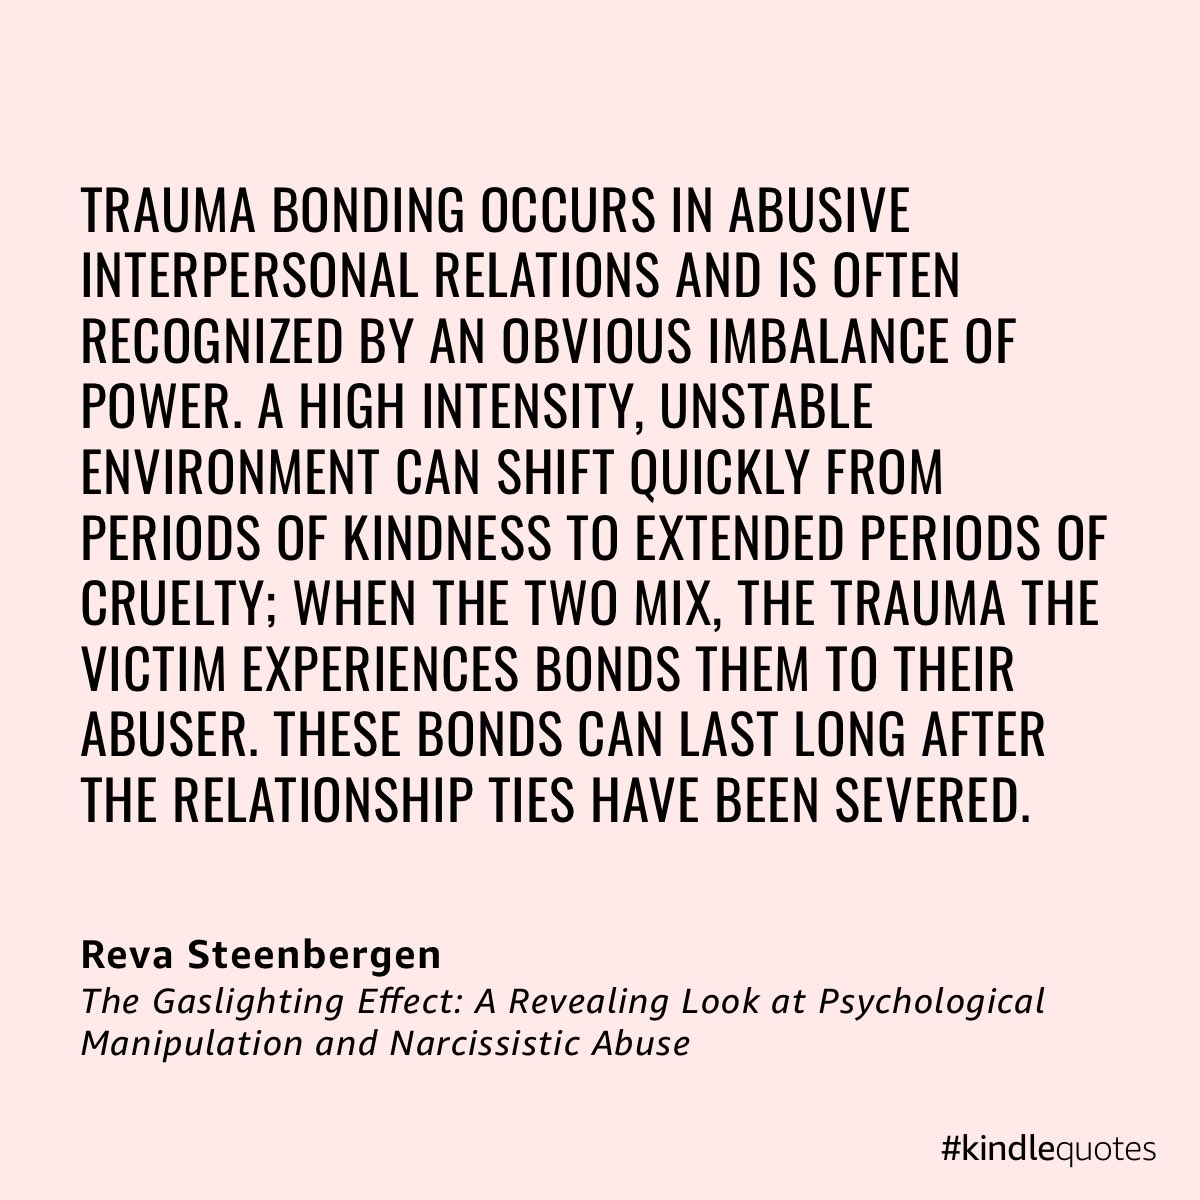 This fits with how I explained the hidden emotional abuse. He loves me. He loves me not.  And after an anger outburst where you get this sick sinking feeling in the pit of your stomach. I said I want a man not a monster. #traumabonds #abusesurvivor  amzn.eu/eRVXyyl